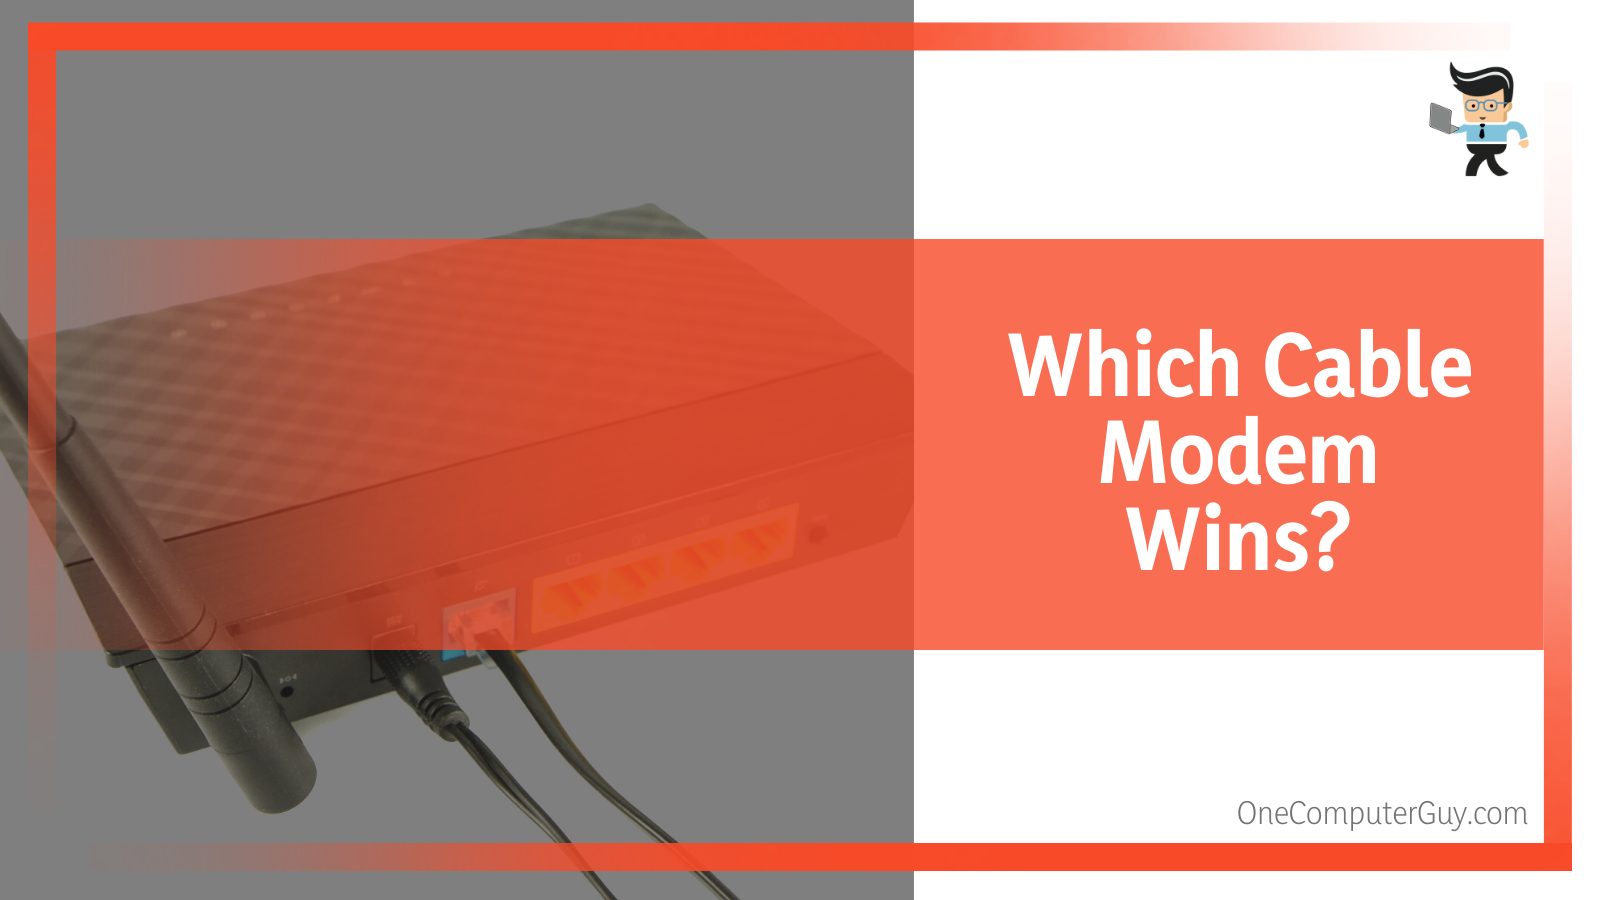 Which Cable Modem Wins